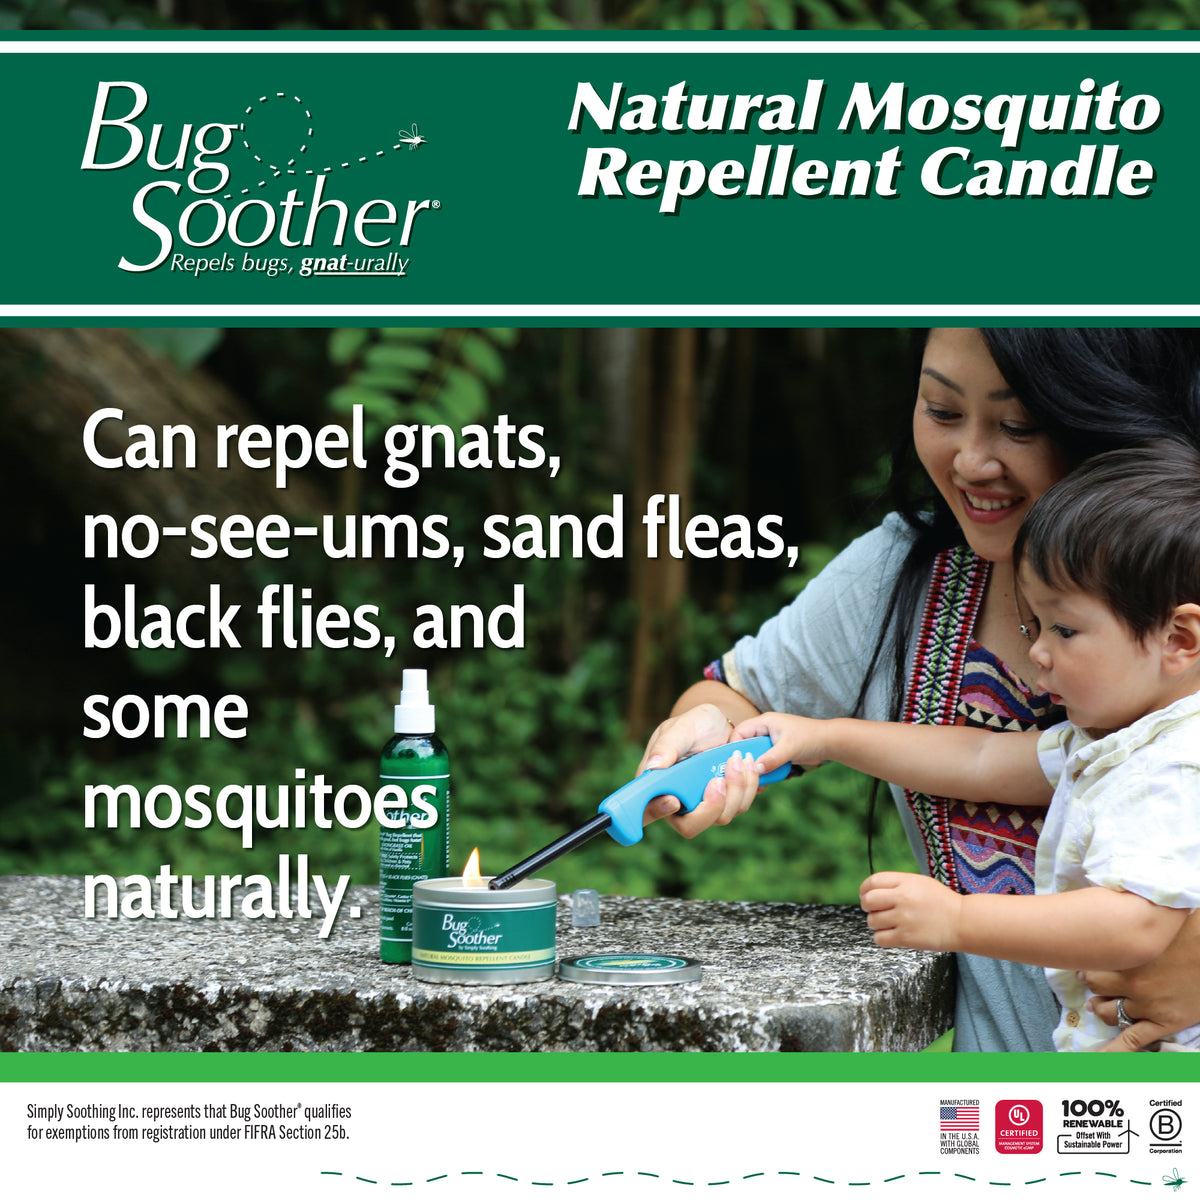 Bug Soother Insect Repellent Candle + 1 oz. Spray Bottle Pack, 1-count